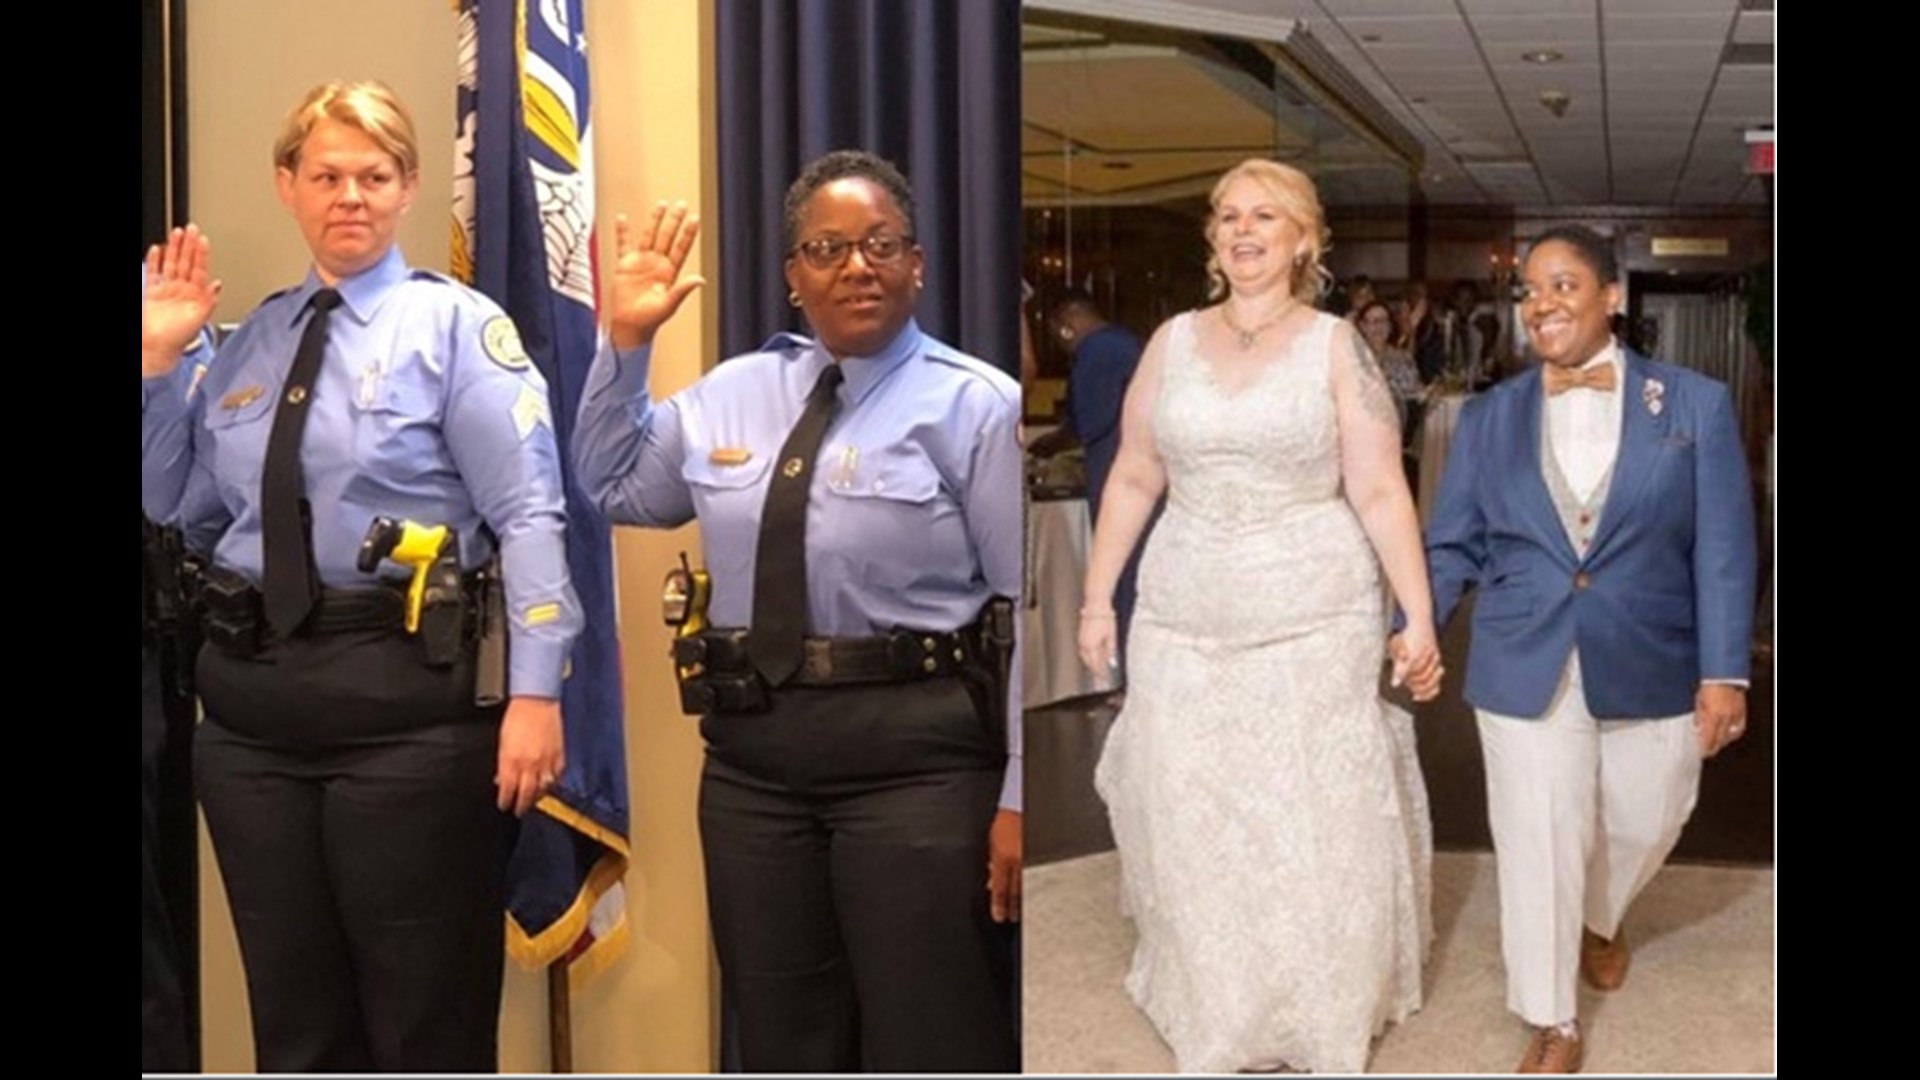 Nopd Officers Become First Same Sex Couple To Be Promoted Together